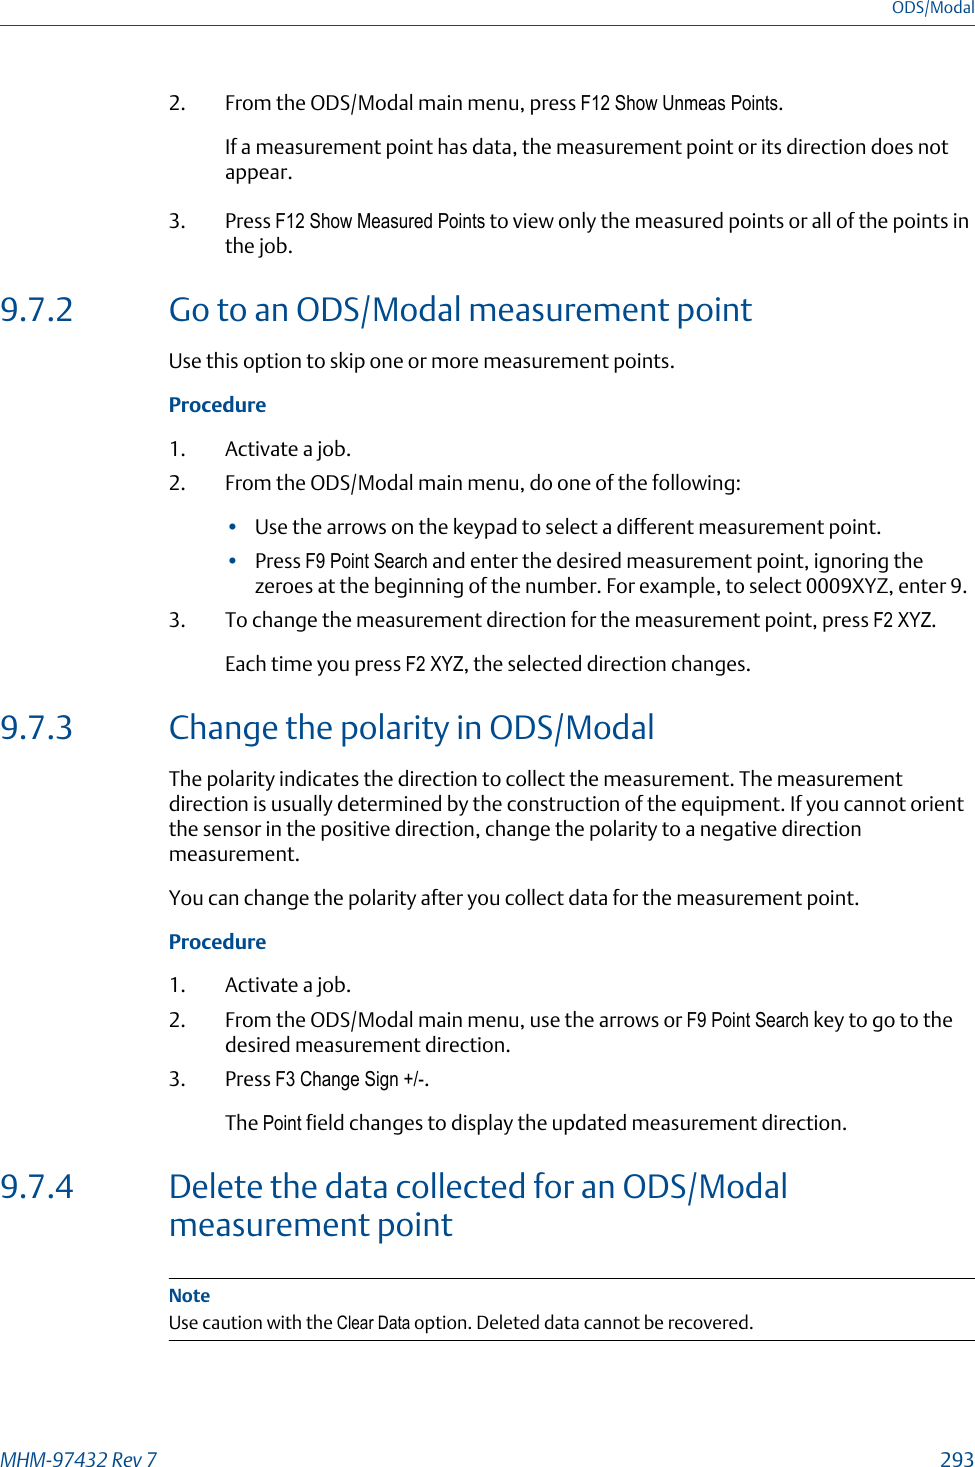 2. From the ODS/Modal main menu, press F12 Show Unmeas Points.If a measurement point has data, the measurement point or its direction does notappear.3. Press F12 Show Measured Points to view only the measured points or all of the points inthe job.9.7.2 Go to an ODS/Modal measurement pointUse this option to skip one or more measurement points.Procedure1. Activate a job.2. From the ODS/Modal main menu, do one of the following:•Use the arrows on the keypad to select a different measurement point.•Press F9 Point Search and enter the desired measurement point, ignoring thezeroes at the beginning of the number. For example, to select 0009XYZ, enter 9.3. To change the measurement direction for the measurement point, press F2 XYZ.Each time you press F2 XYZ, the selected direction changes.9.7.3 Change the polarity in ODS/ModalThe polarity indicates the direction to collect the measurement. The measurementdirection is usually determined by the construction of the equipment. If you cannot orientthe sensor in the positive direction, change the polarity to a negative directionmeasurement.You can change the polarity after you collect data for the measurement point.Procedure1. Activate a job.2. From the ODS/Modal main menu, use the arrows or F9 Point Search key to go to thedesired measurement direction.3. Press F3 Change Sign +/-.The Point field changes to display the updated measurement direction.9.7.4 Delete the data collected for an ODS/Modalmeasurement pointNoteUse caution with the Clear Data option. Deleted data cannot be recovered.ODS/ModalMHM-97432 Rev 7  293